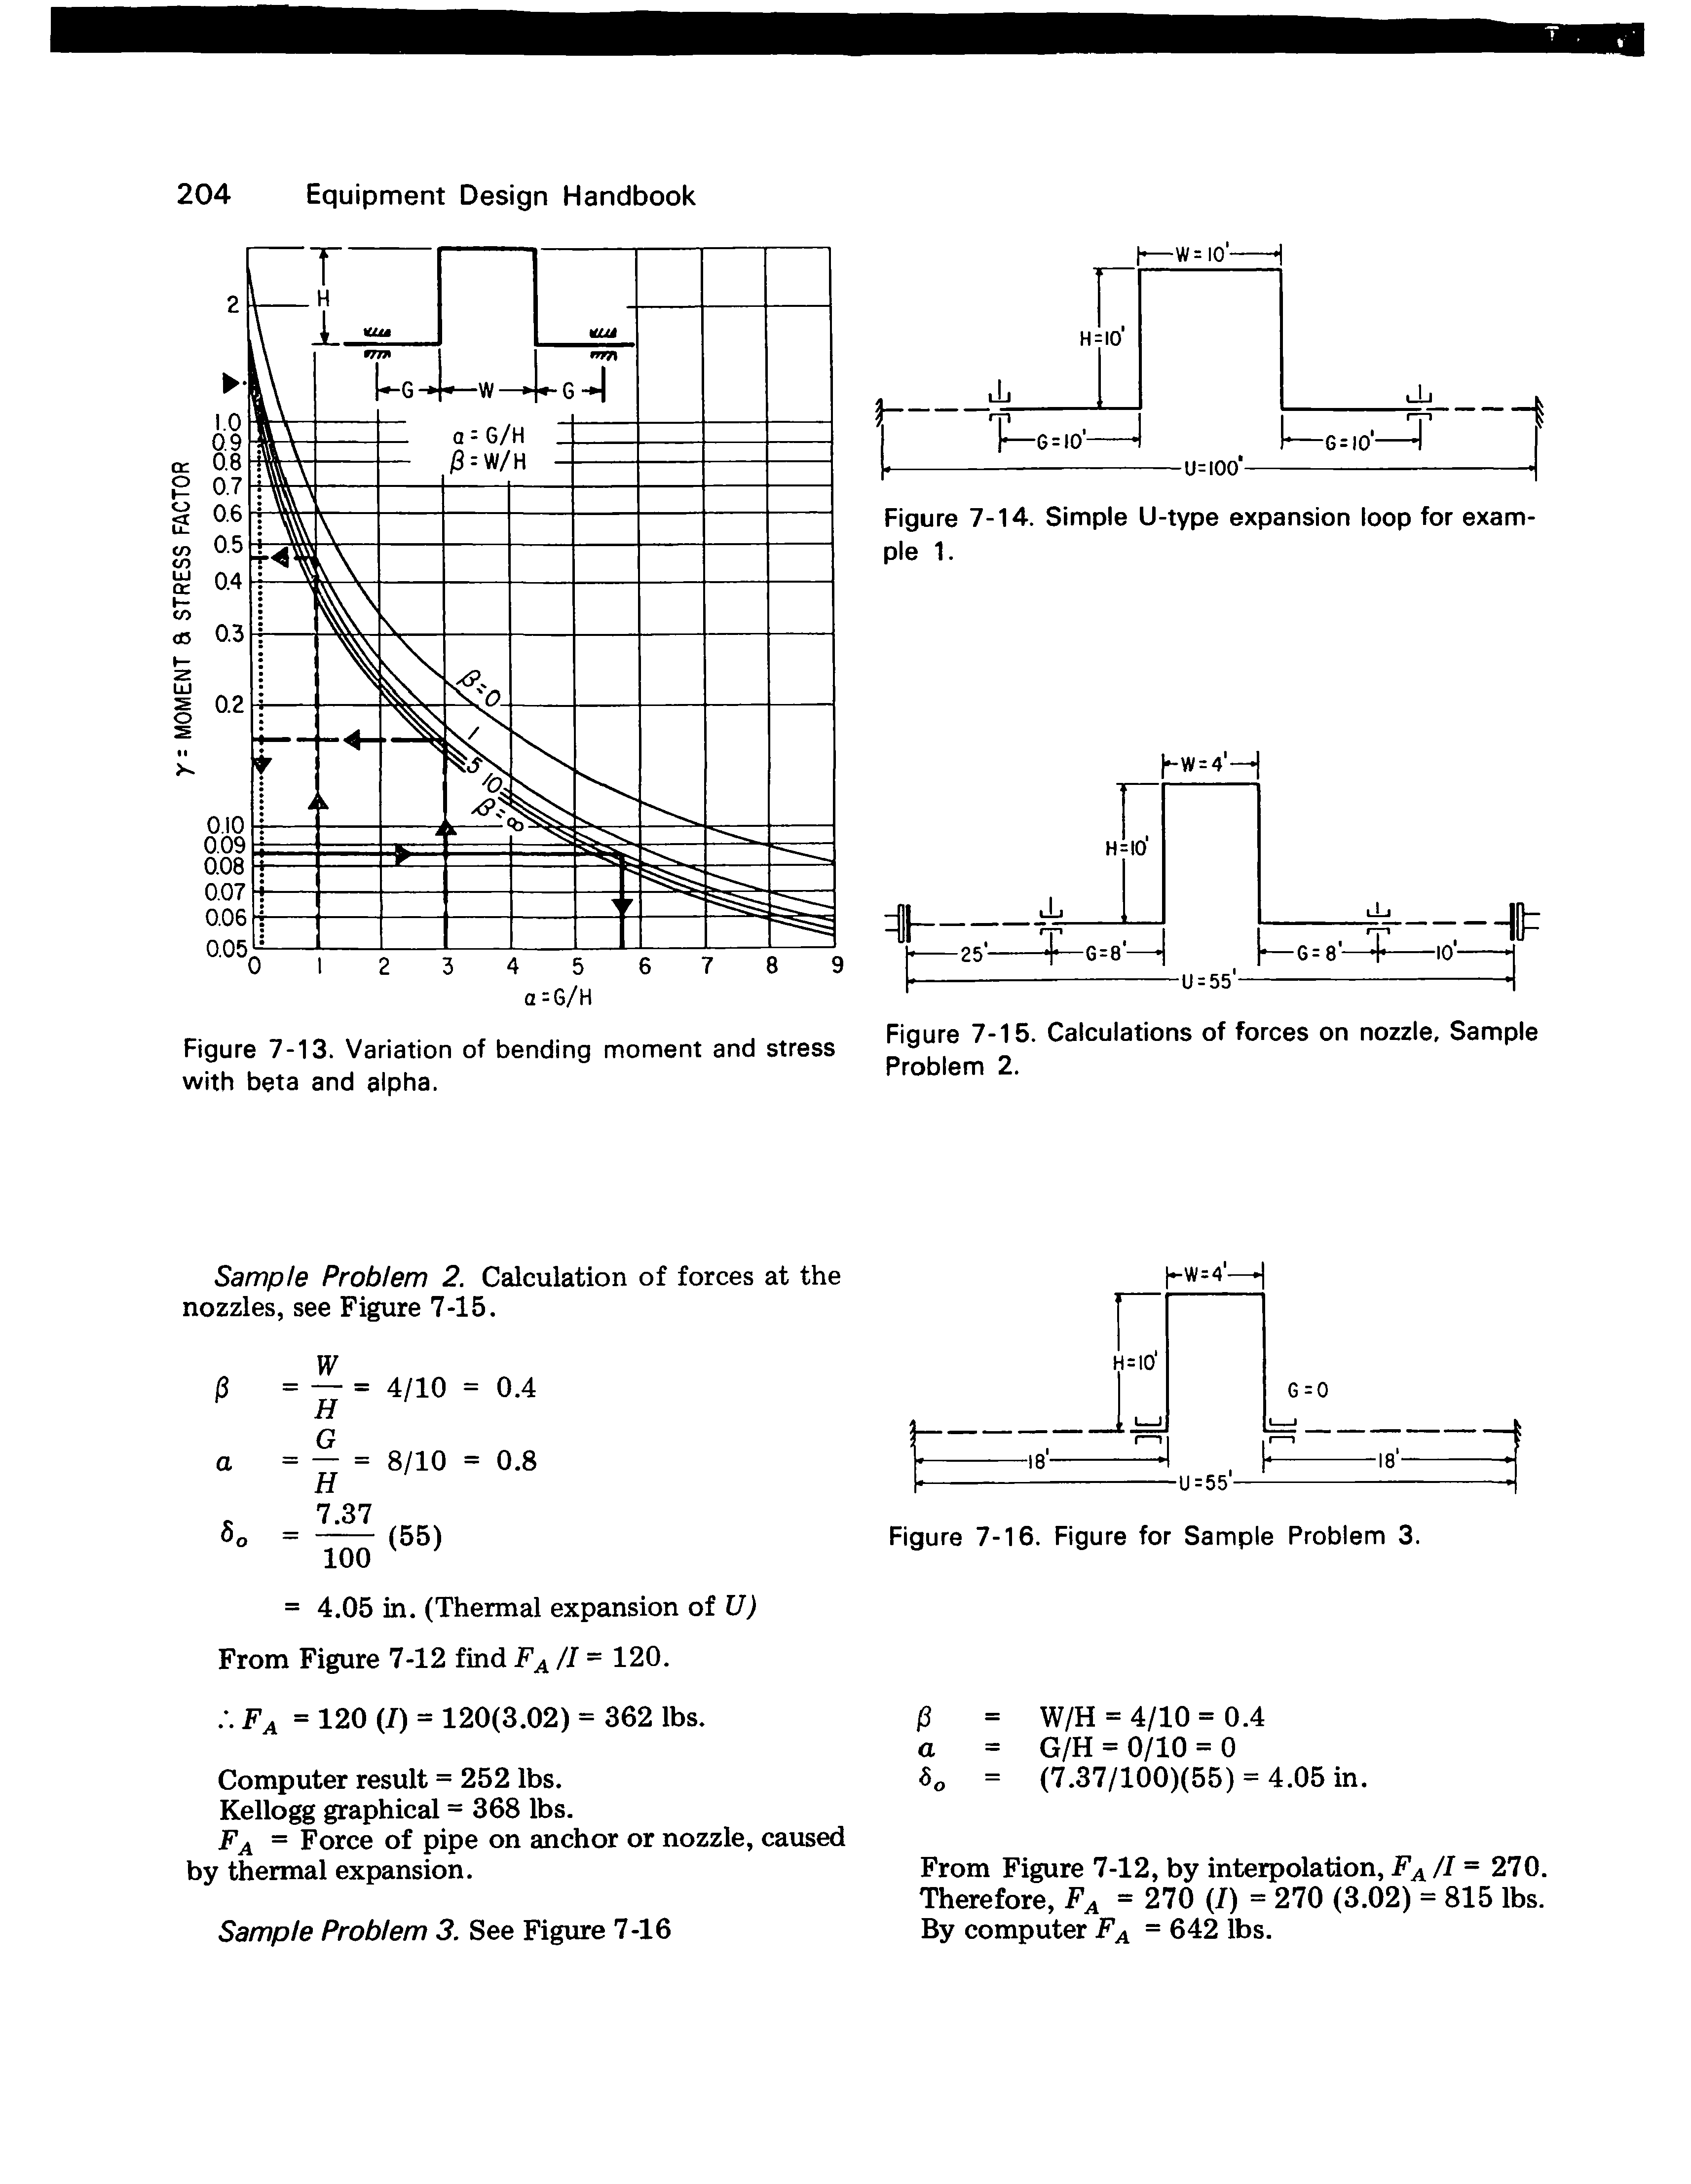 Figure 7-13. Variation of bending moment and stress with beta and alpha.